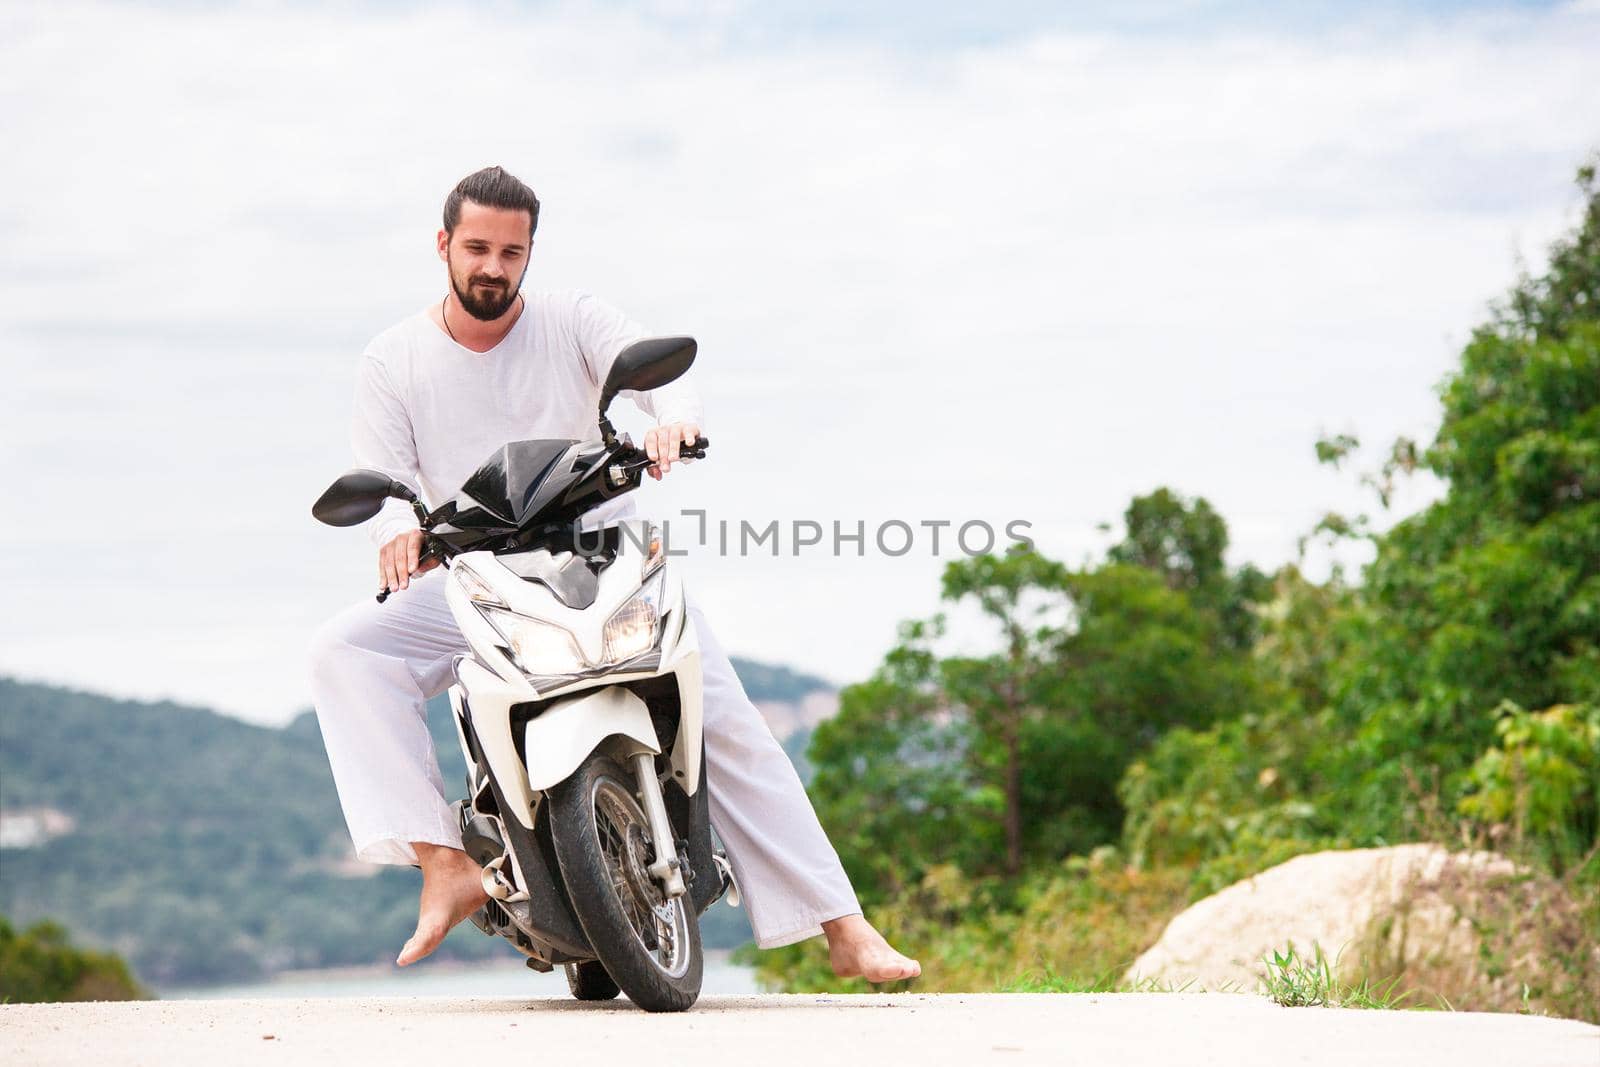 Brutal biker with beard in white sitting on motorbike. Sunny day in the mountains.